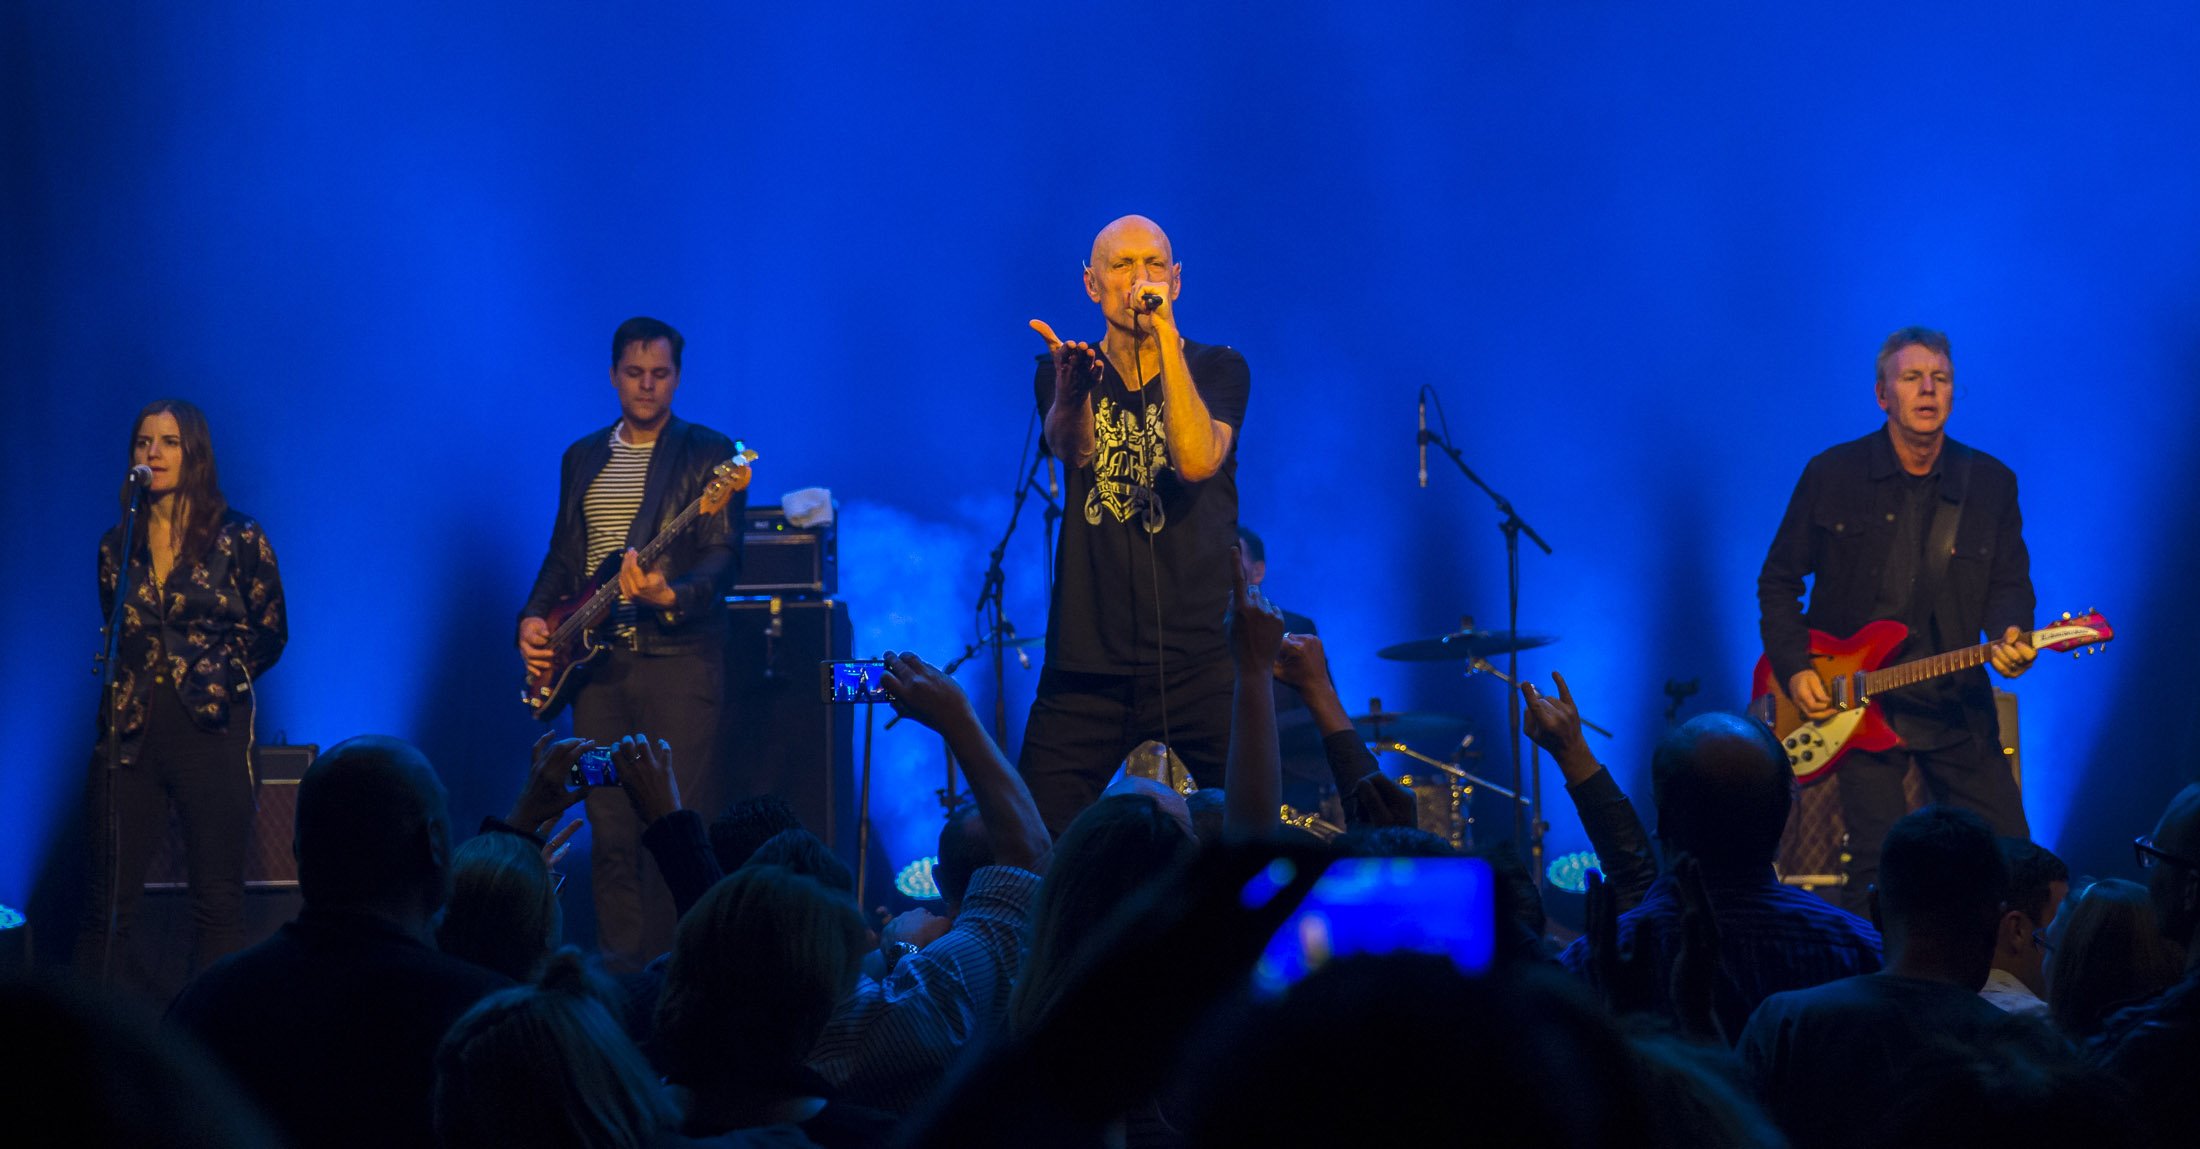 SYDNEY, AUSTRALIA - AUGUST 11: Peter Garrett  and  ‘The Alter Egos’ Performance at The Factory Theatre in support of his solo album "A Version of Now" on August 11, 2016.